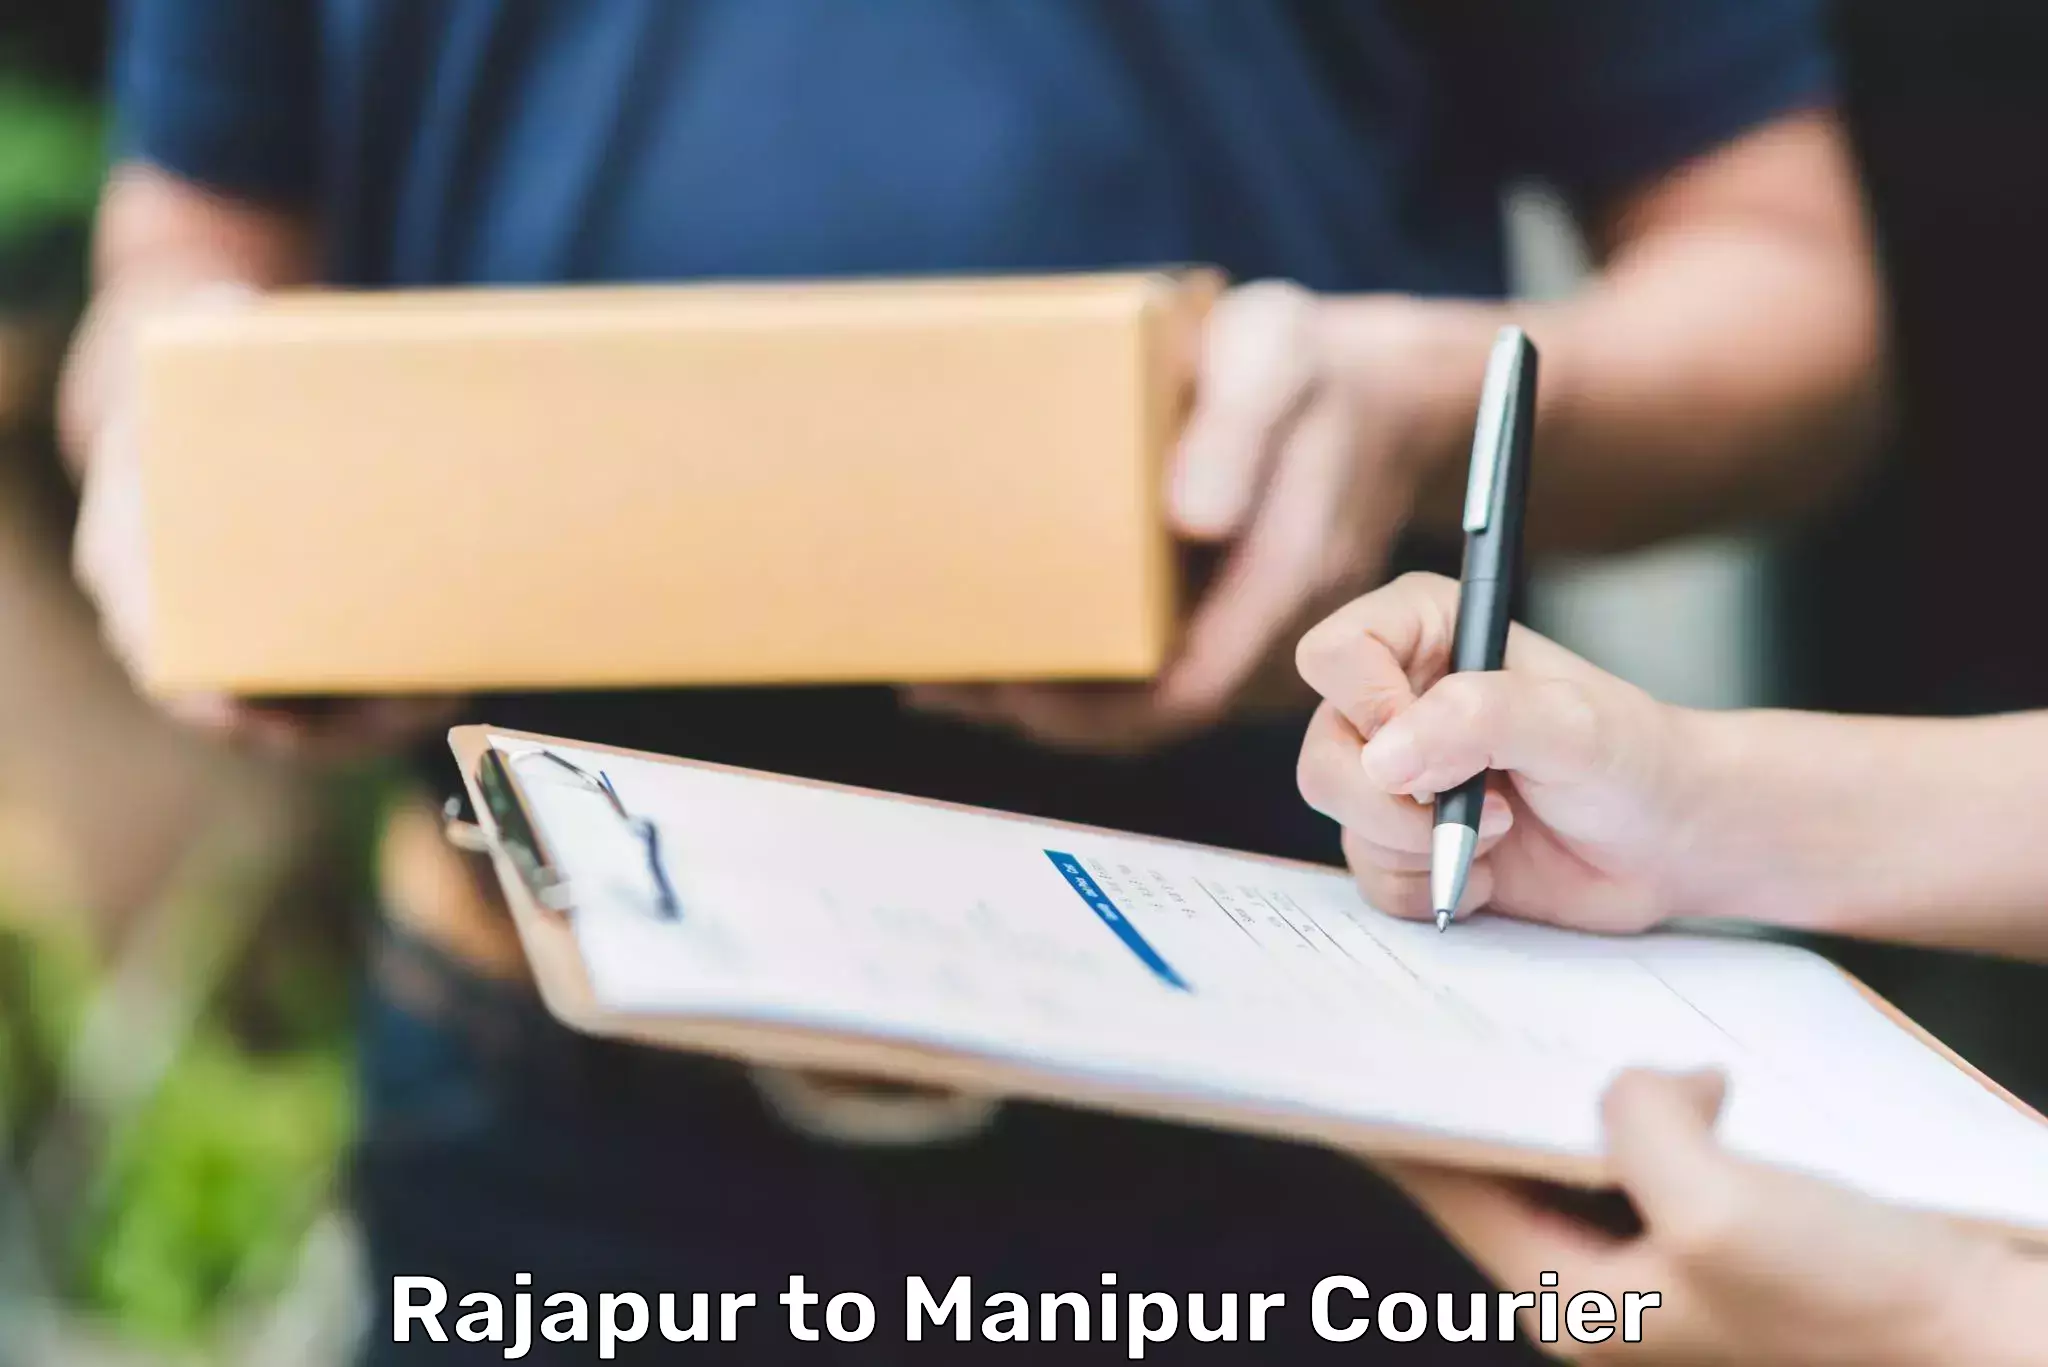 Courier service partnerships Rajapur to Manipur